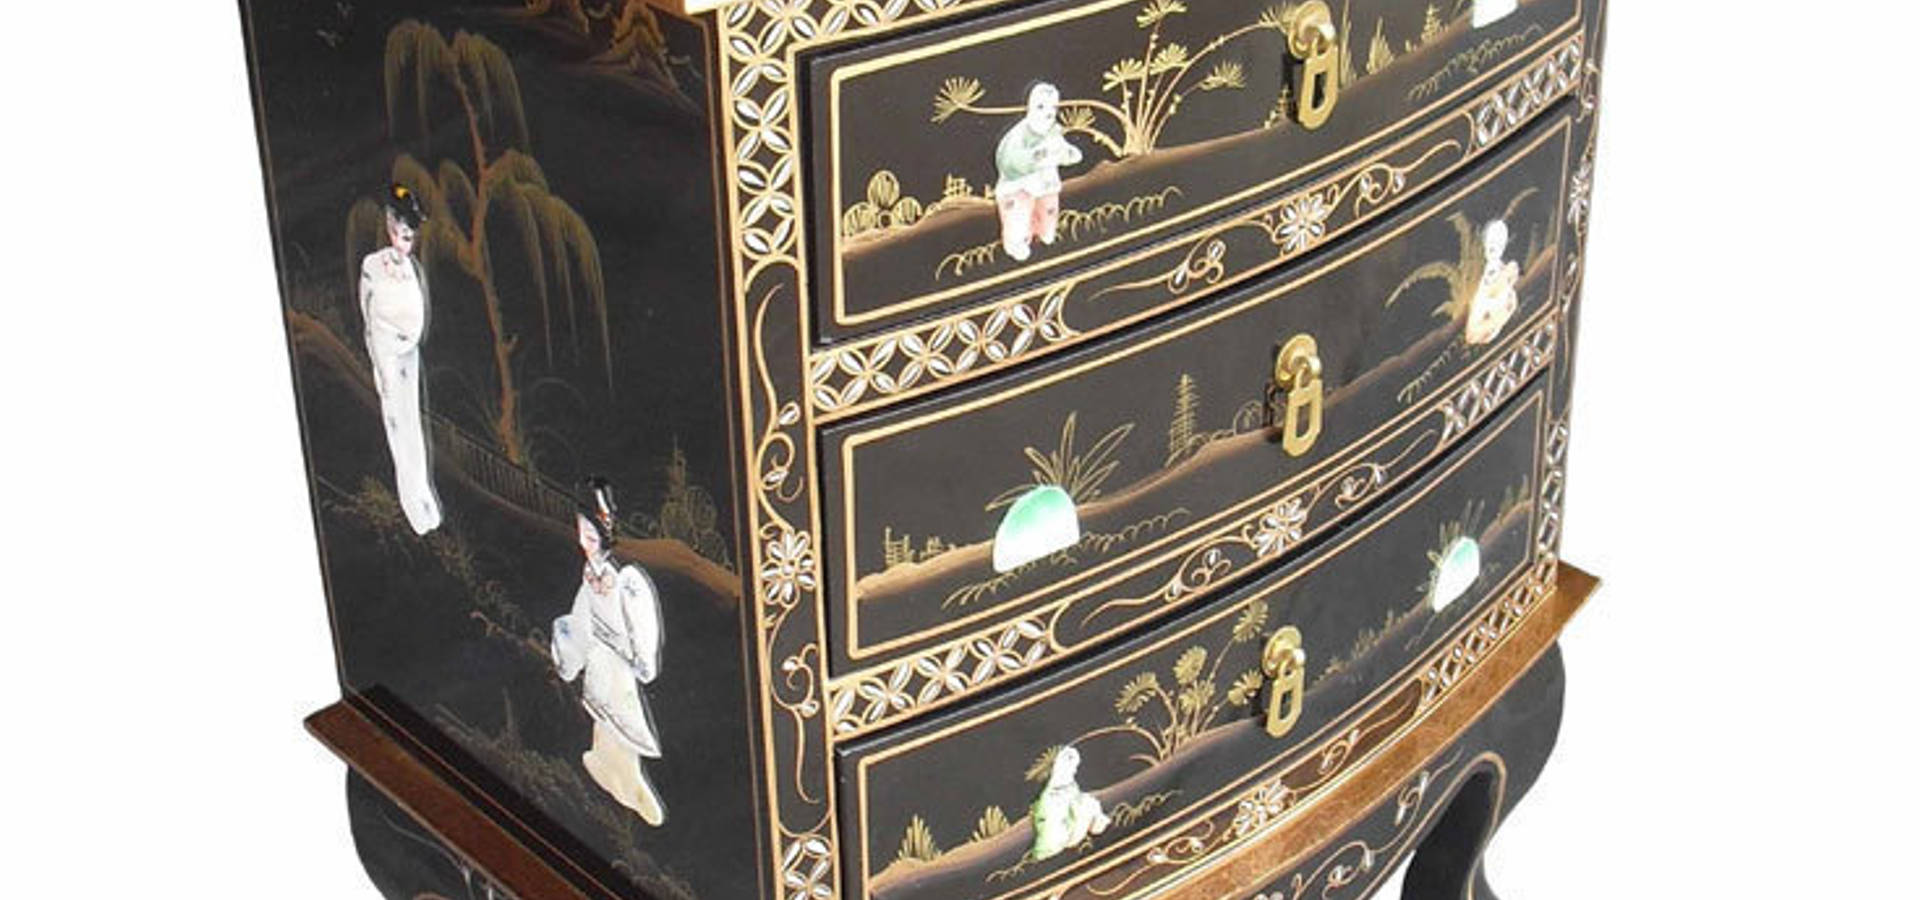 Asia Dragon  Furniture  from London